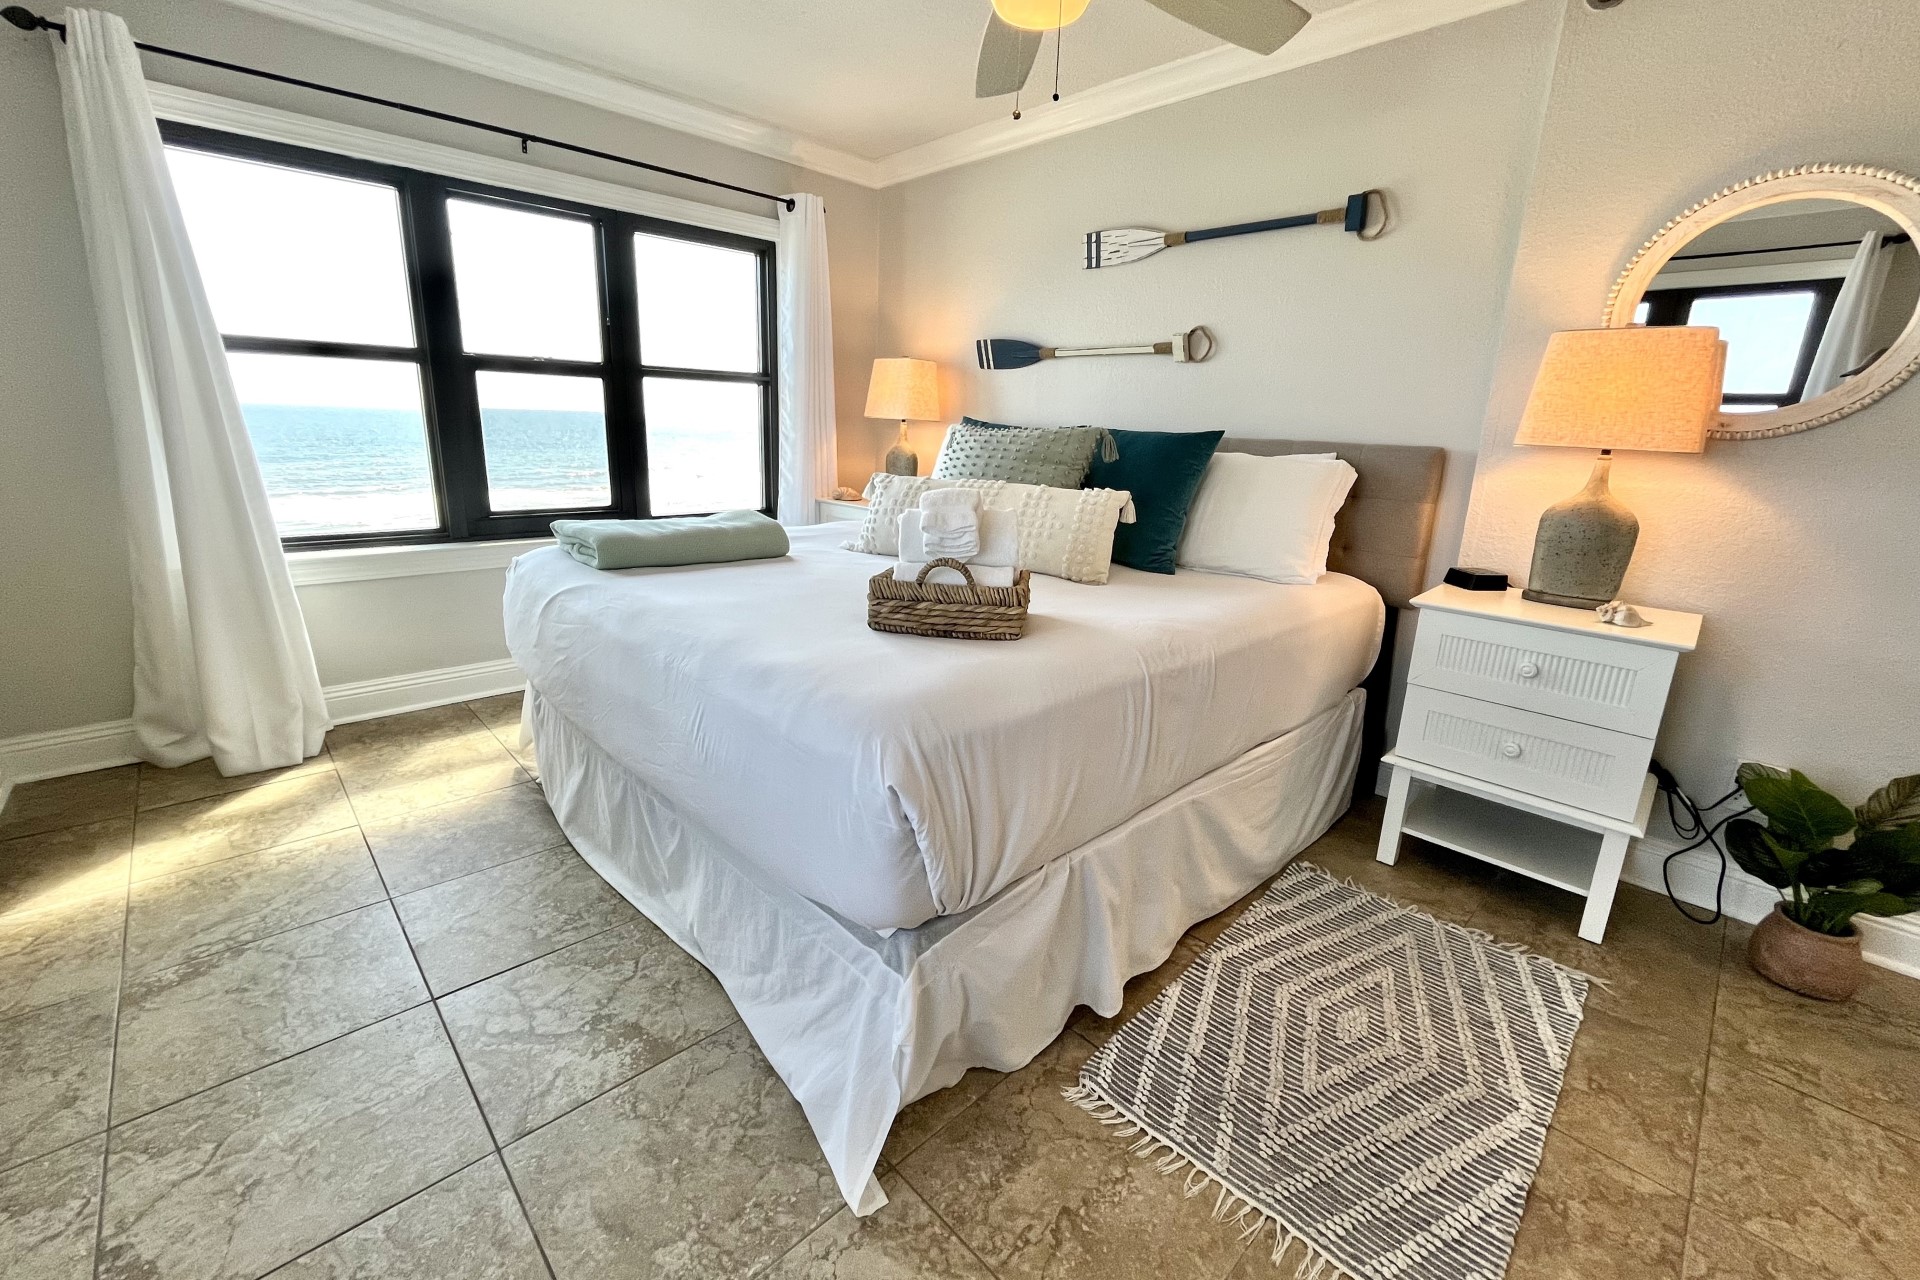 The main bedroom includes a king-size bed and corner views